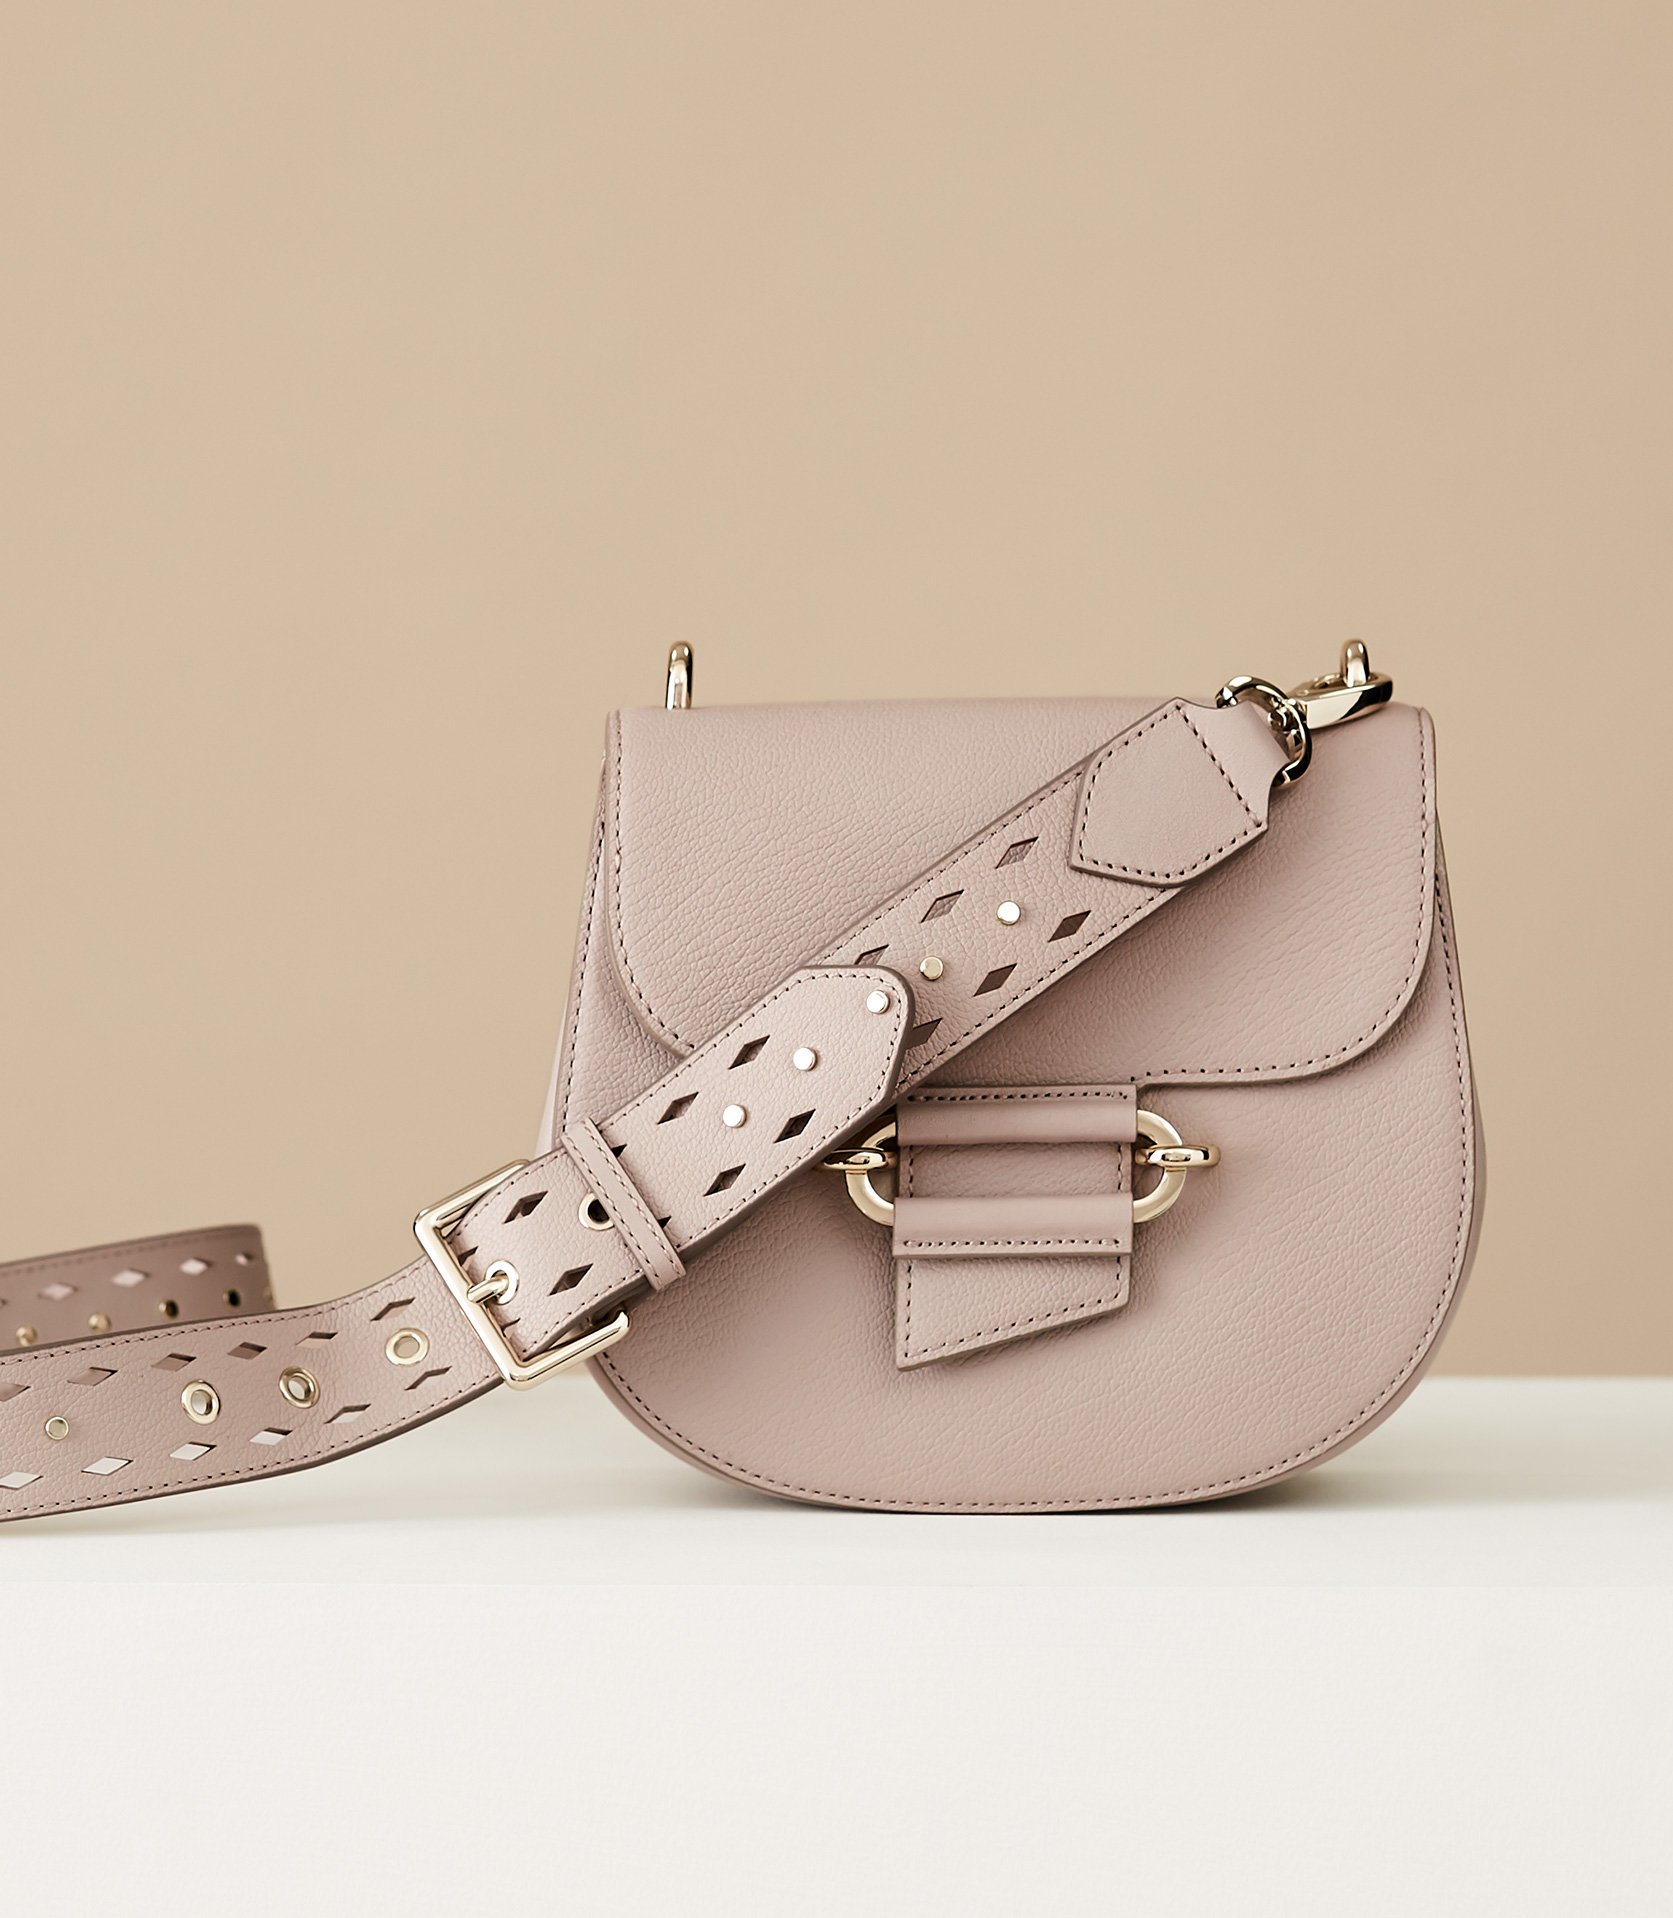 Reiss Maltby Leather Cross Body Bag